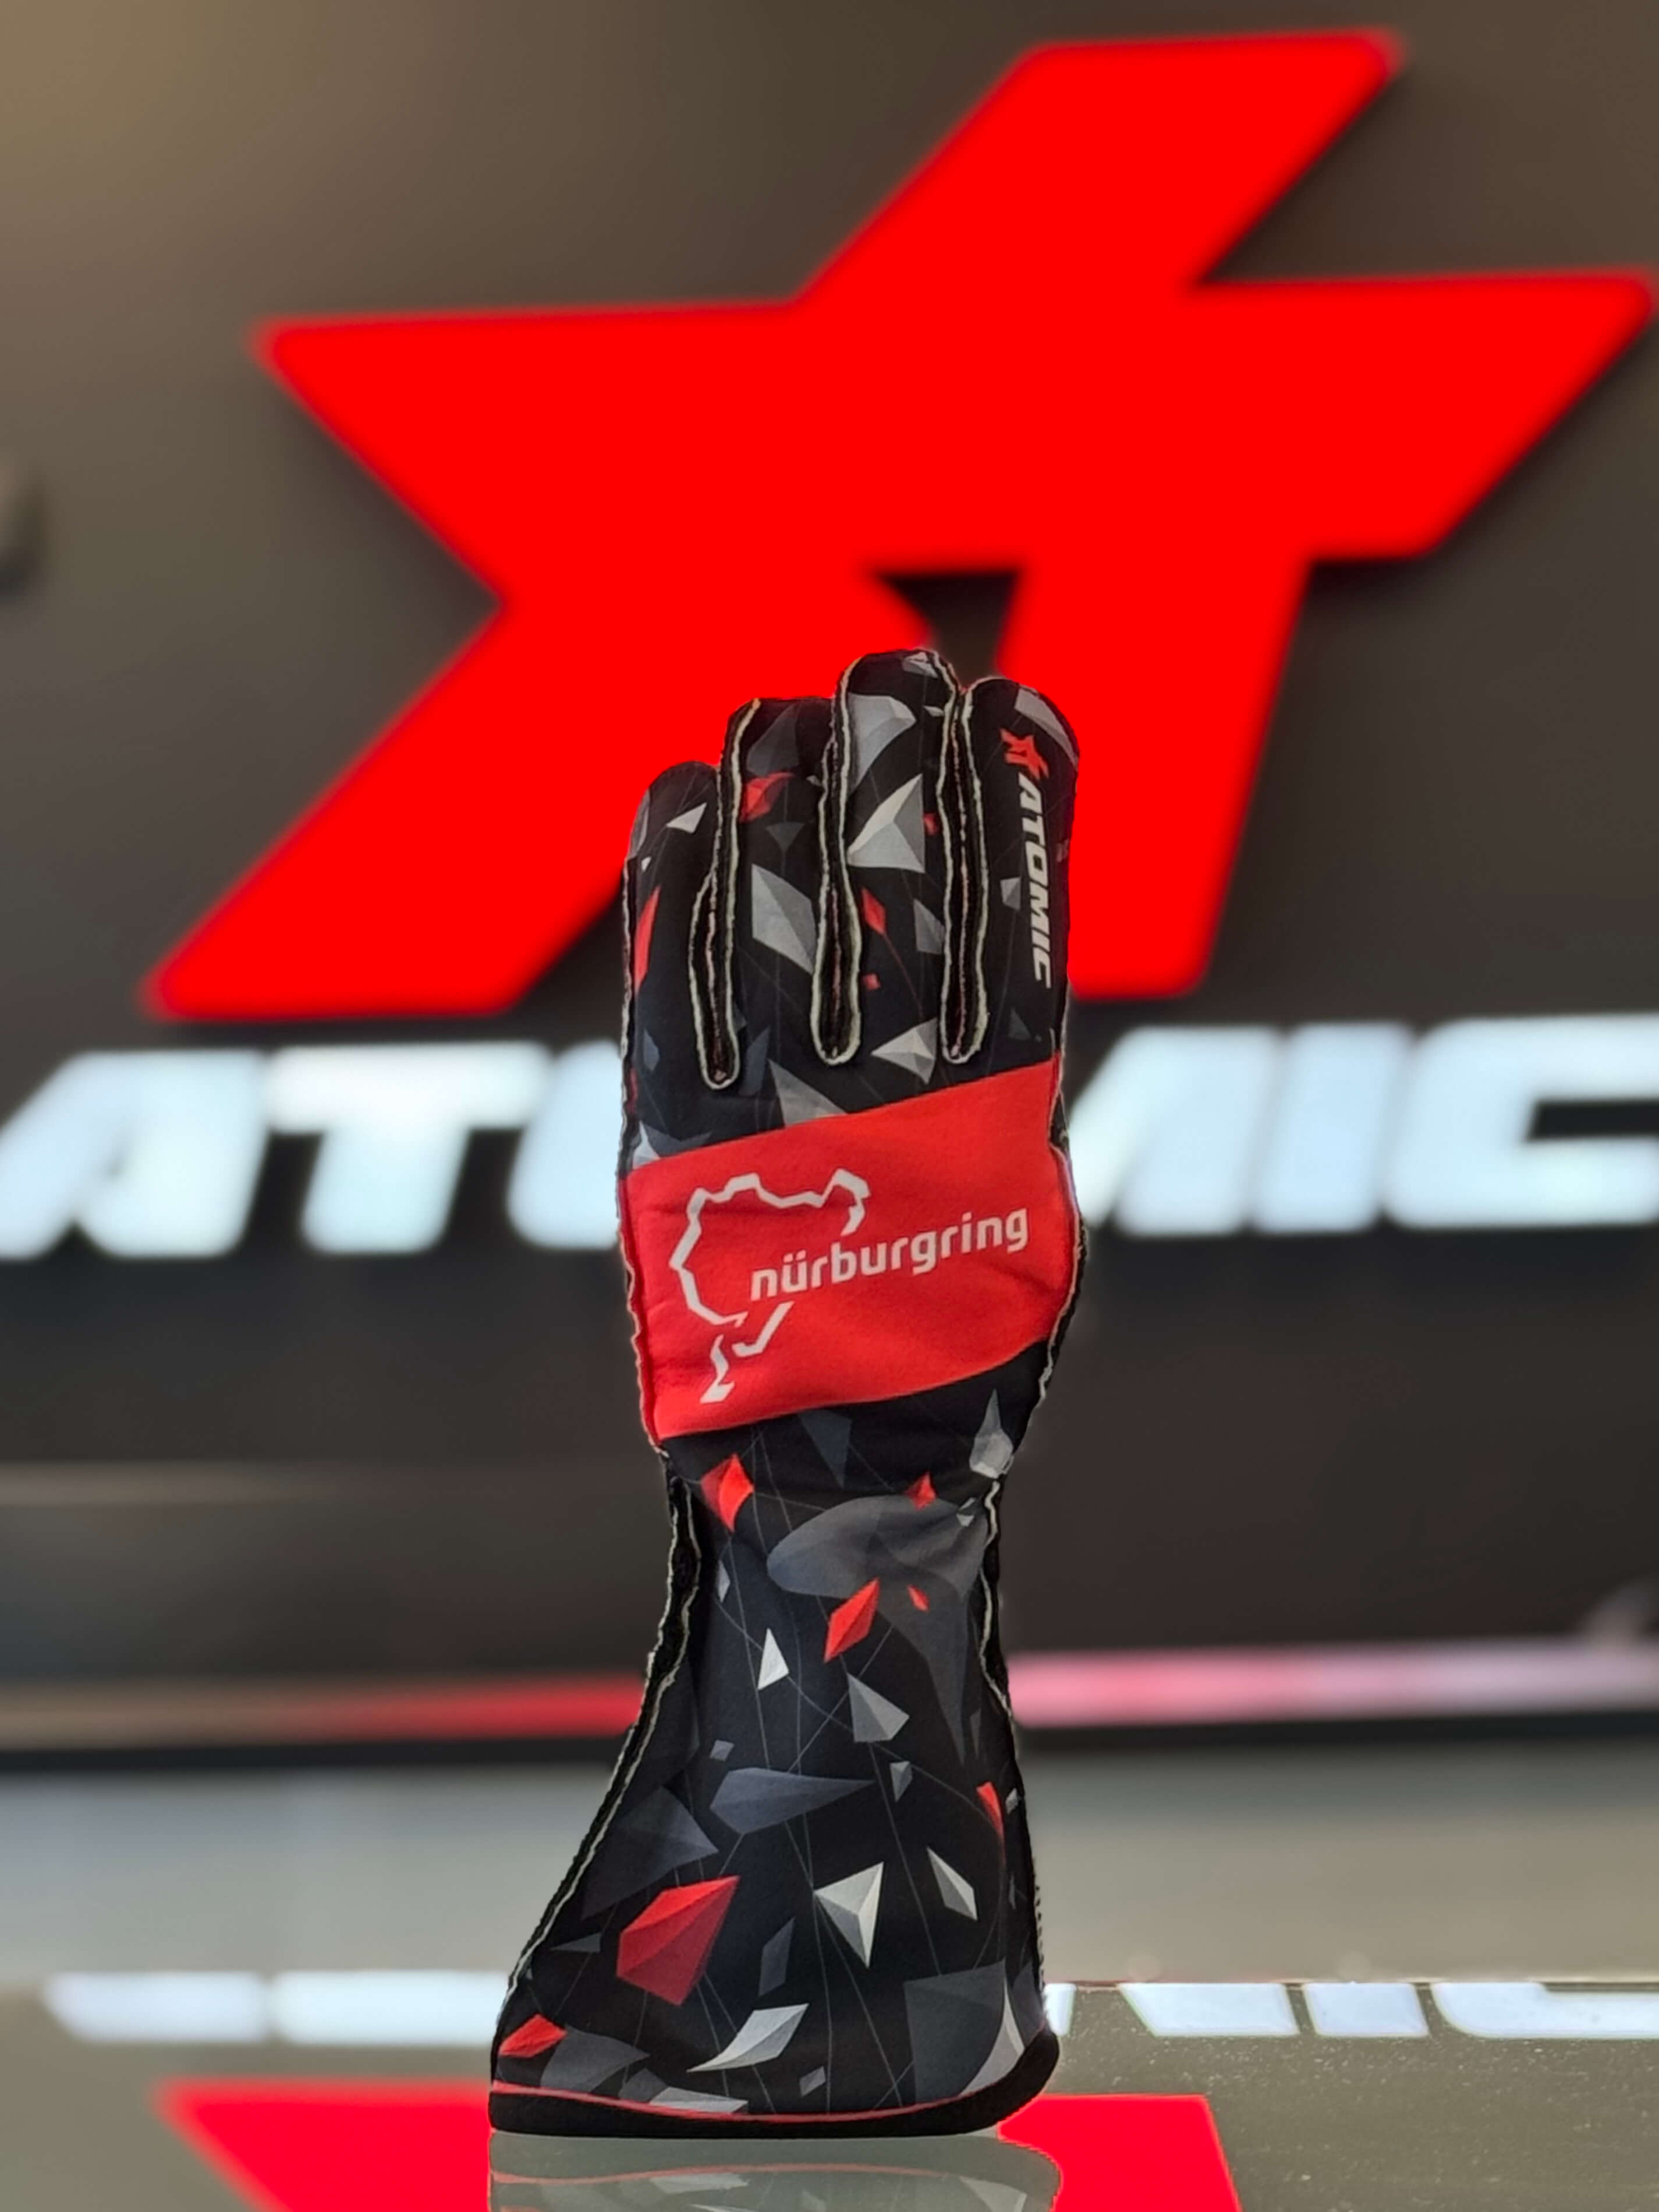 ARD R82-500-M Racing Gloves Atomic Nürburgring Edition FIA 8856-2018 Black/Red Size M (Officially Licensed Nürburgring Product) Photo-0 